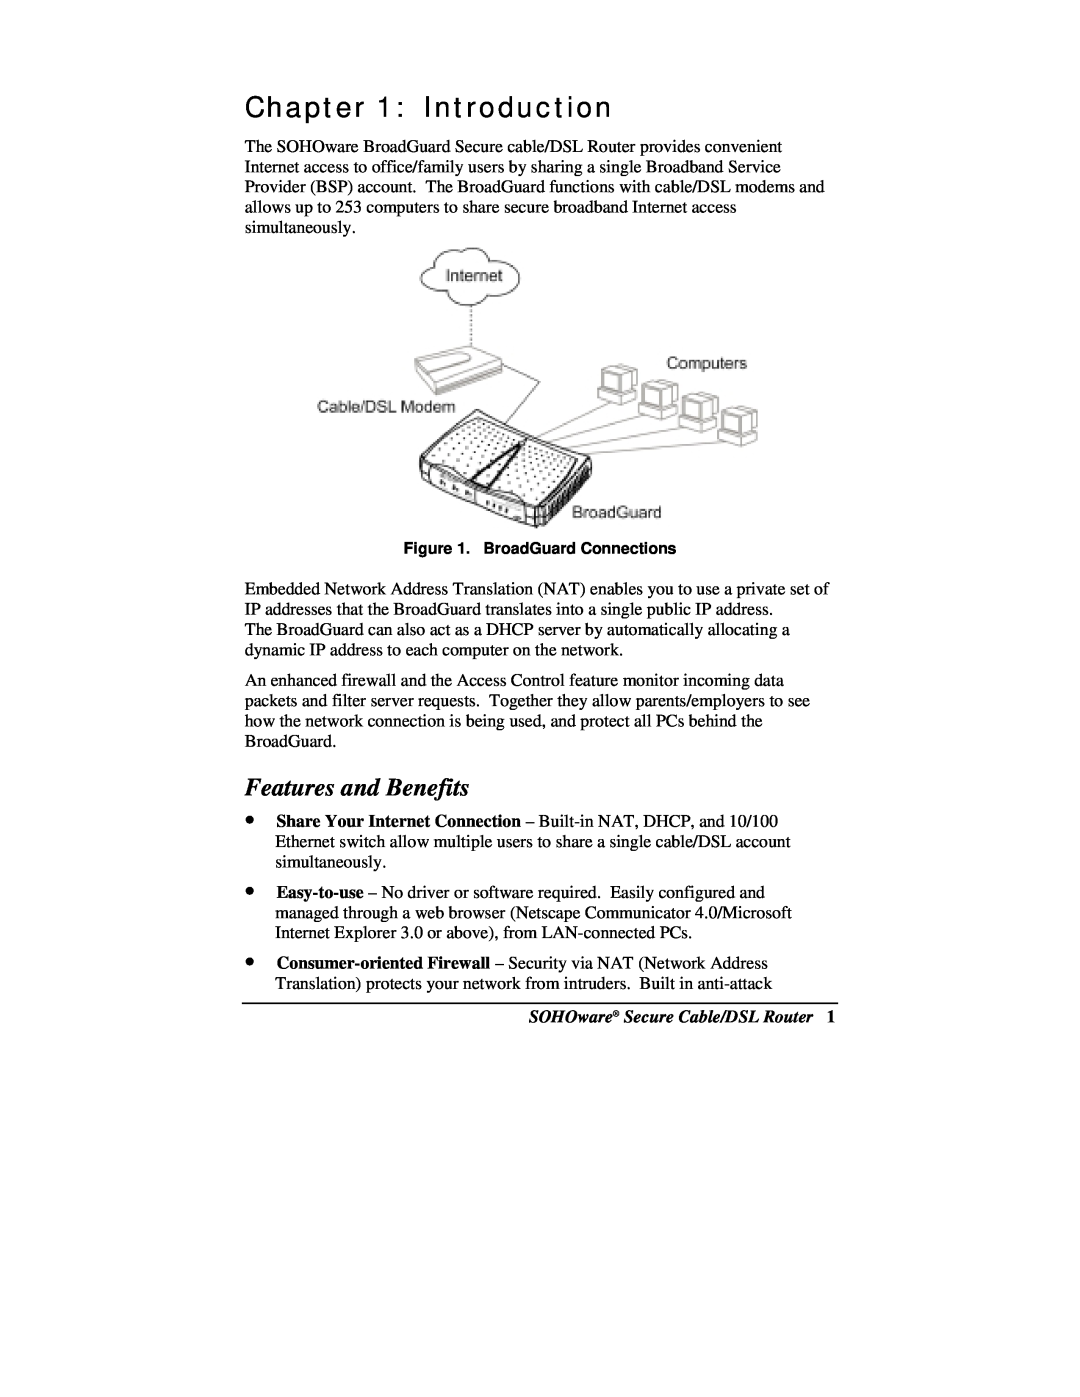 Soho NBG800 manual Introduction, Features and Benefits, SOHOware Secure Cable/DSL Router 